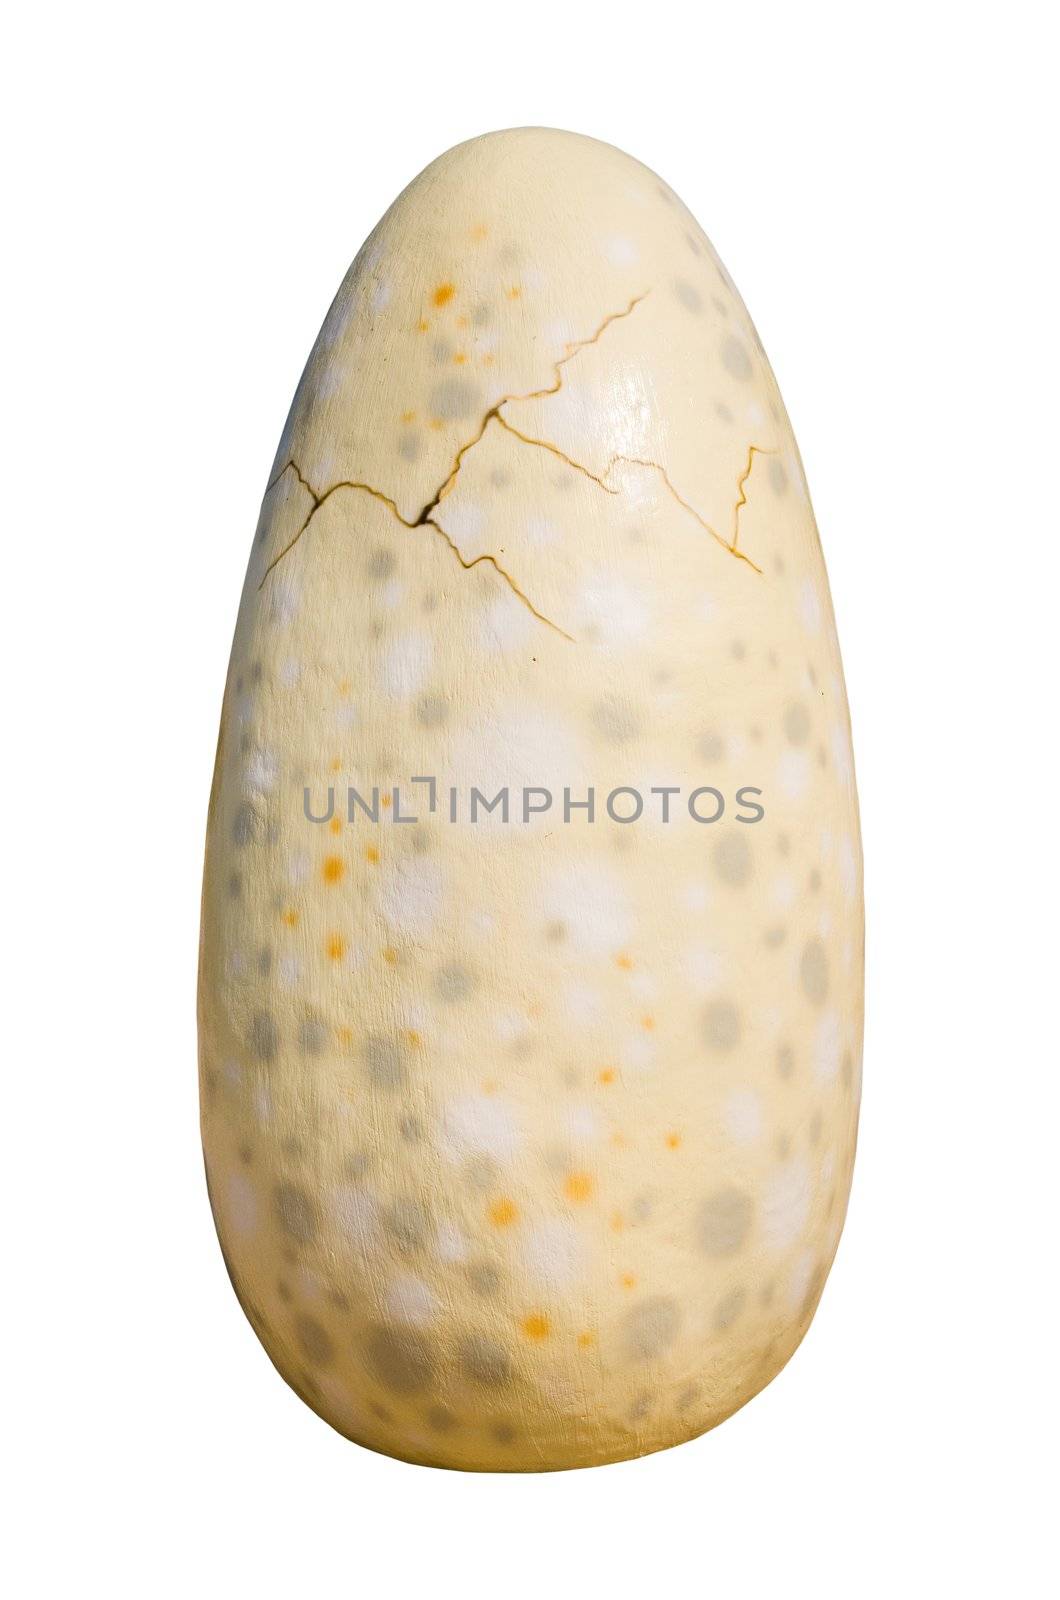 Jurassic park - set of dinosaurs - dinosaur egg isolated on white background with clipping paths